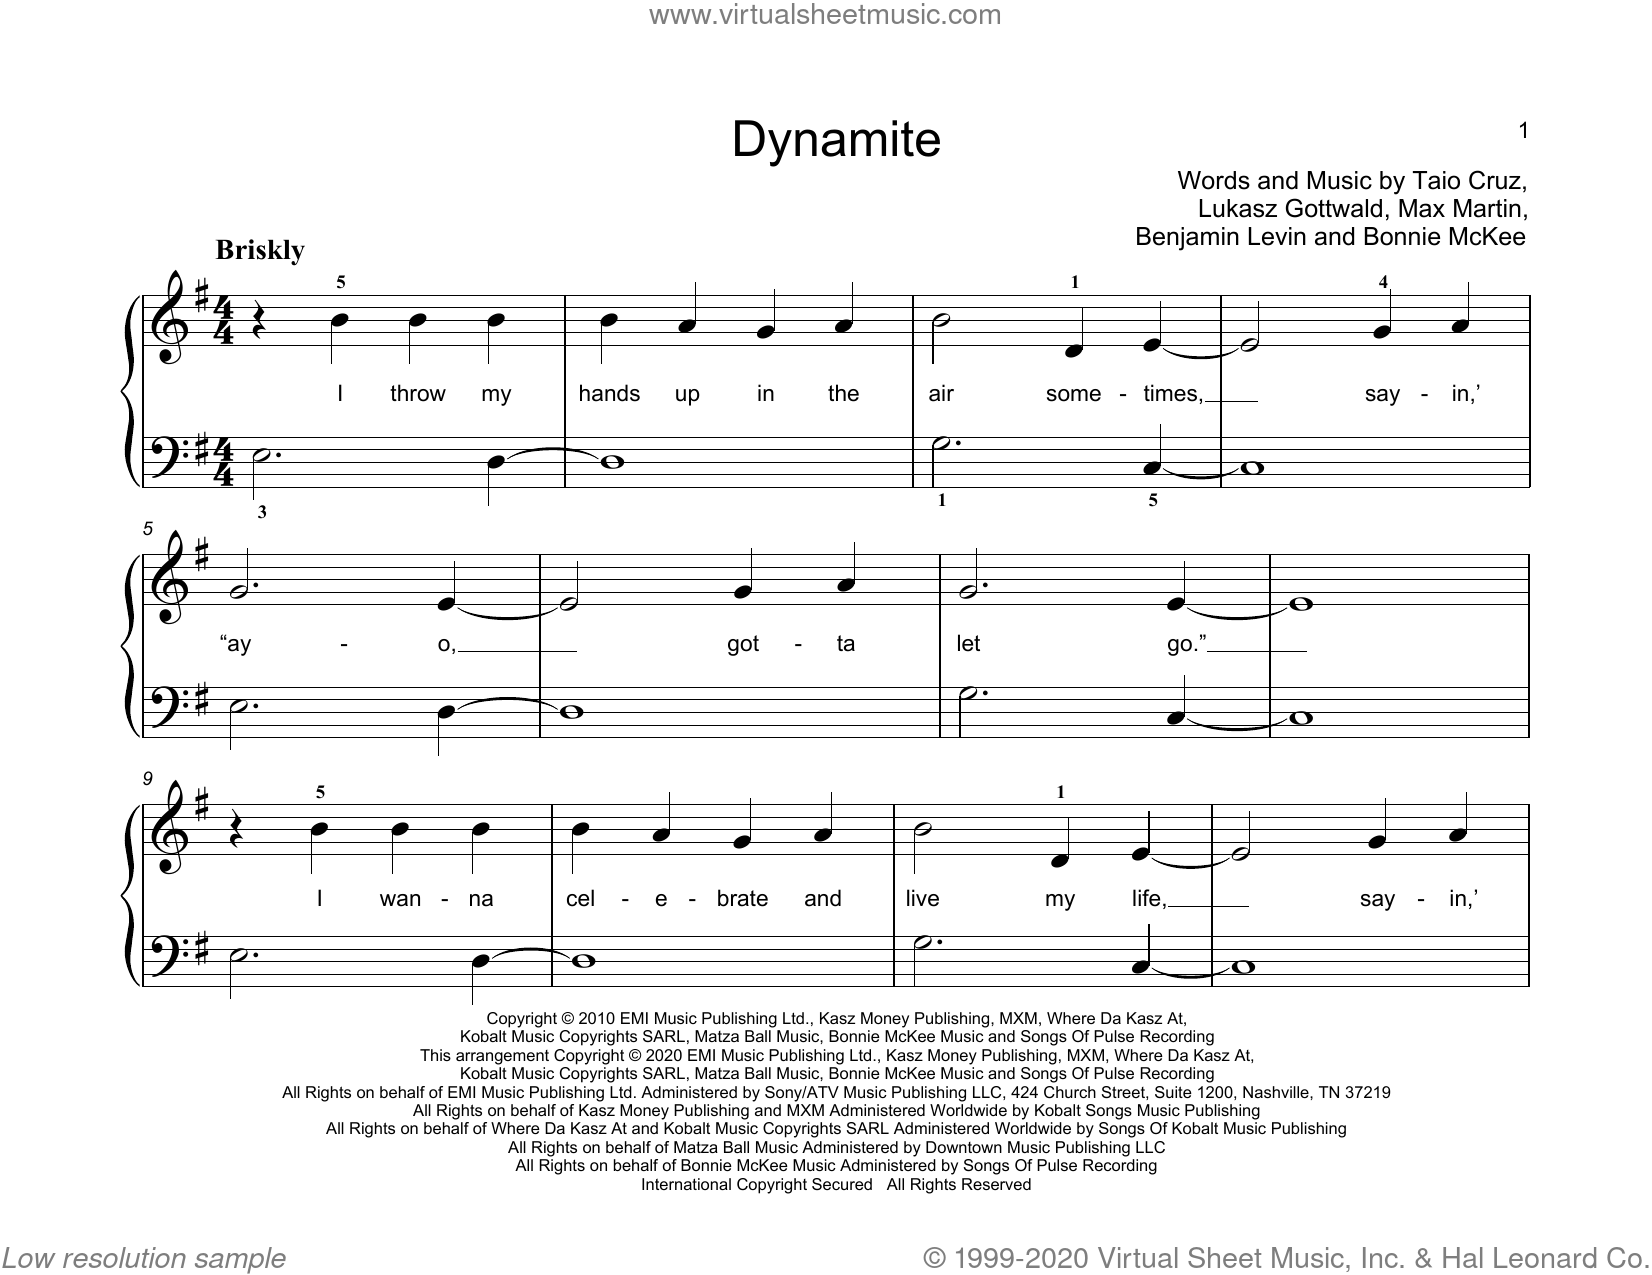 Dynamite Sheet Music For Piano Solo elementary PDF - Dynamite Piano Sheet Music Free Printable